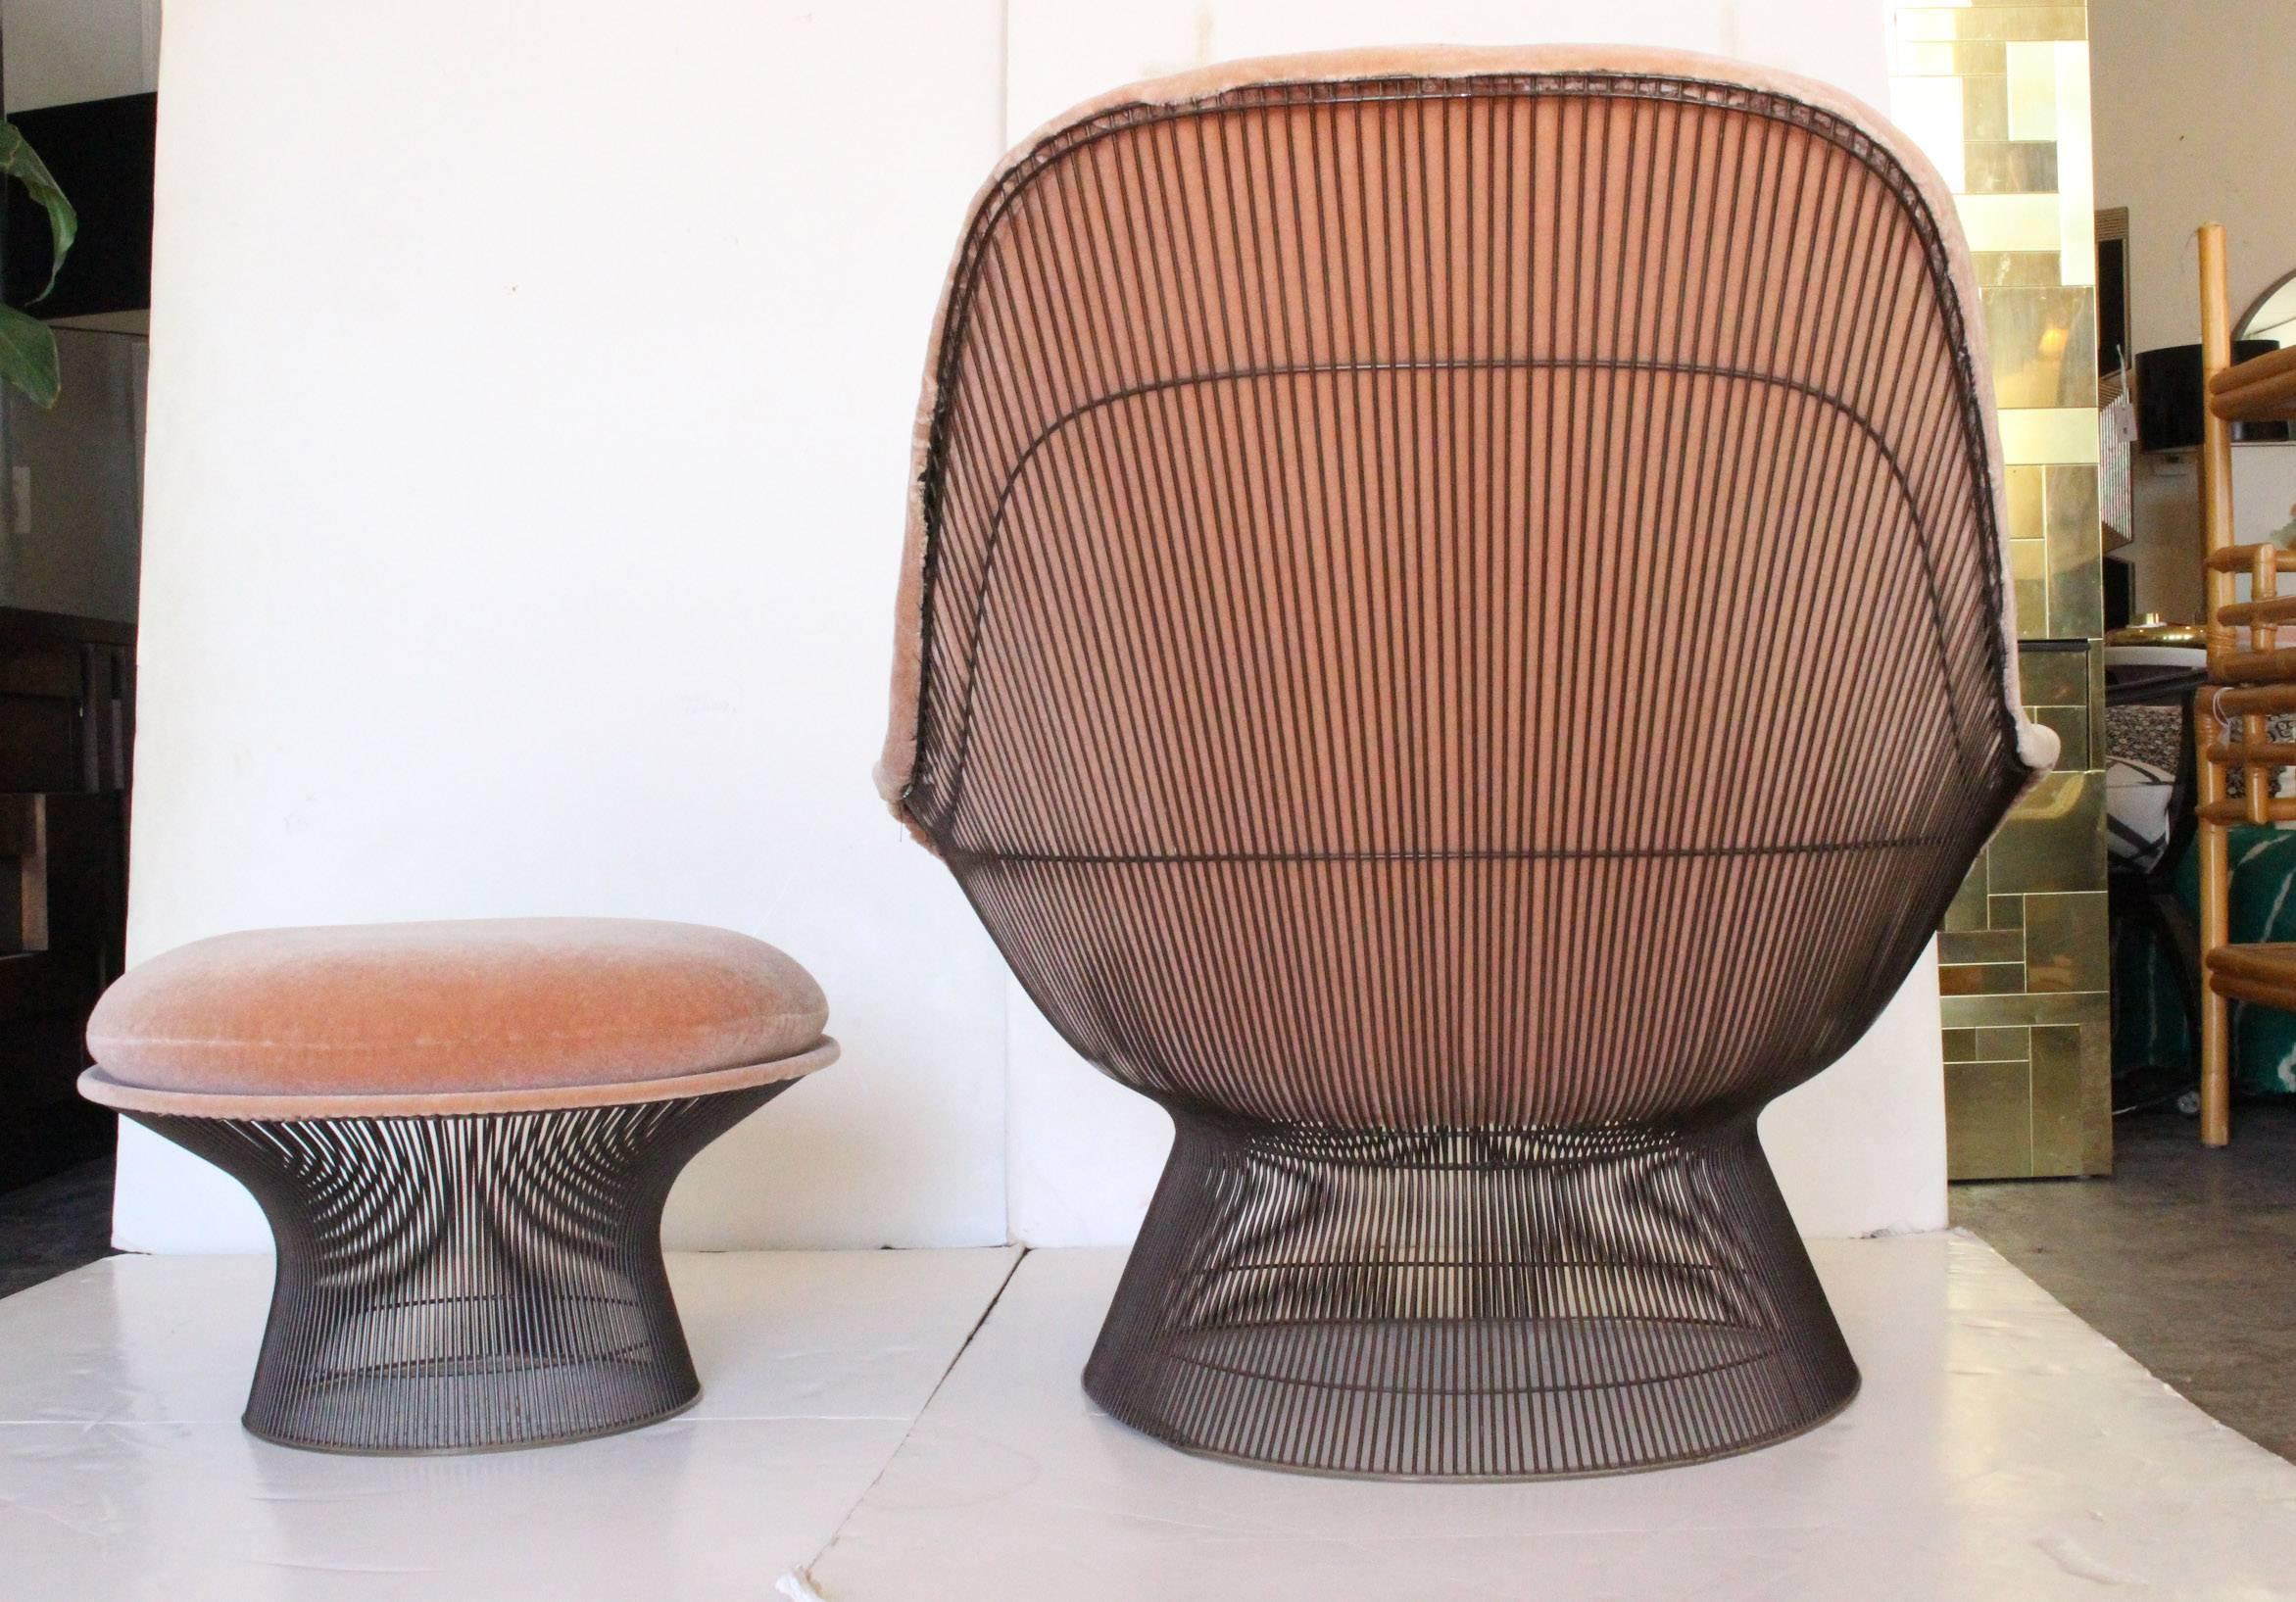 Bronze Lounge Chair and Ottoman by Warren Platner for Knoll 1